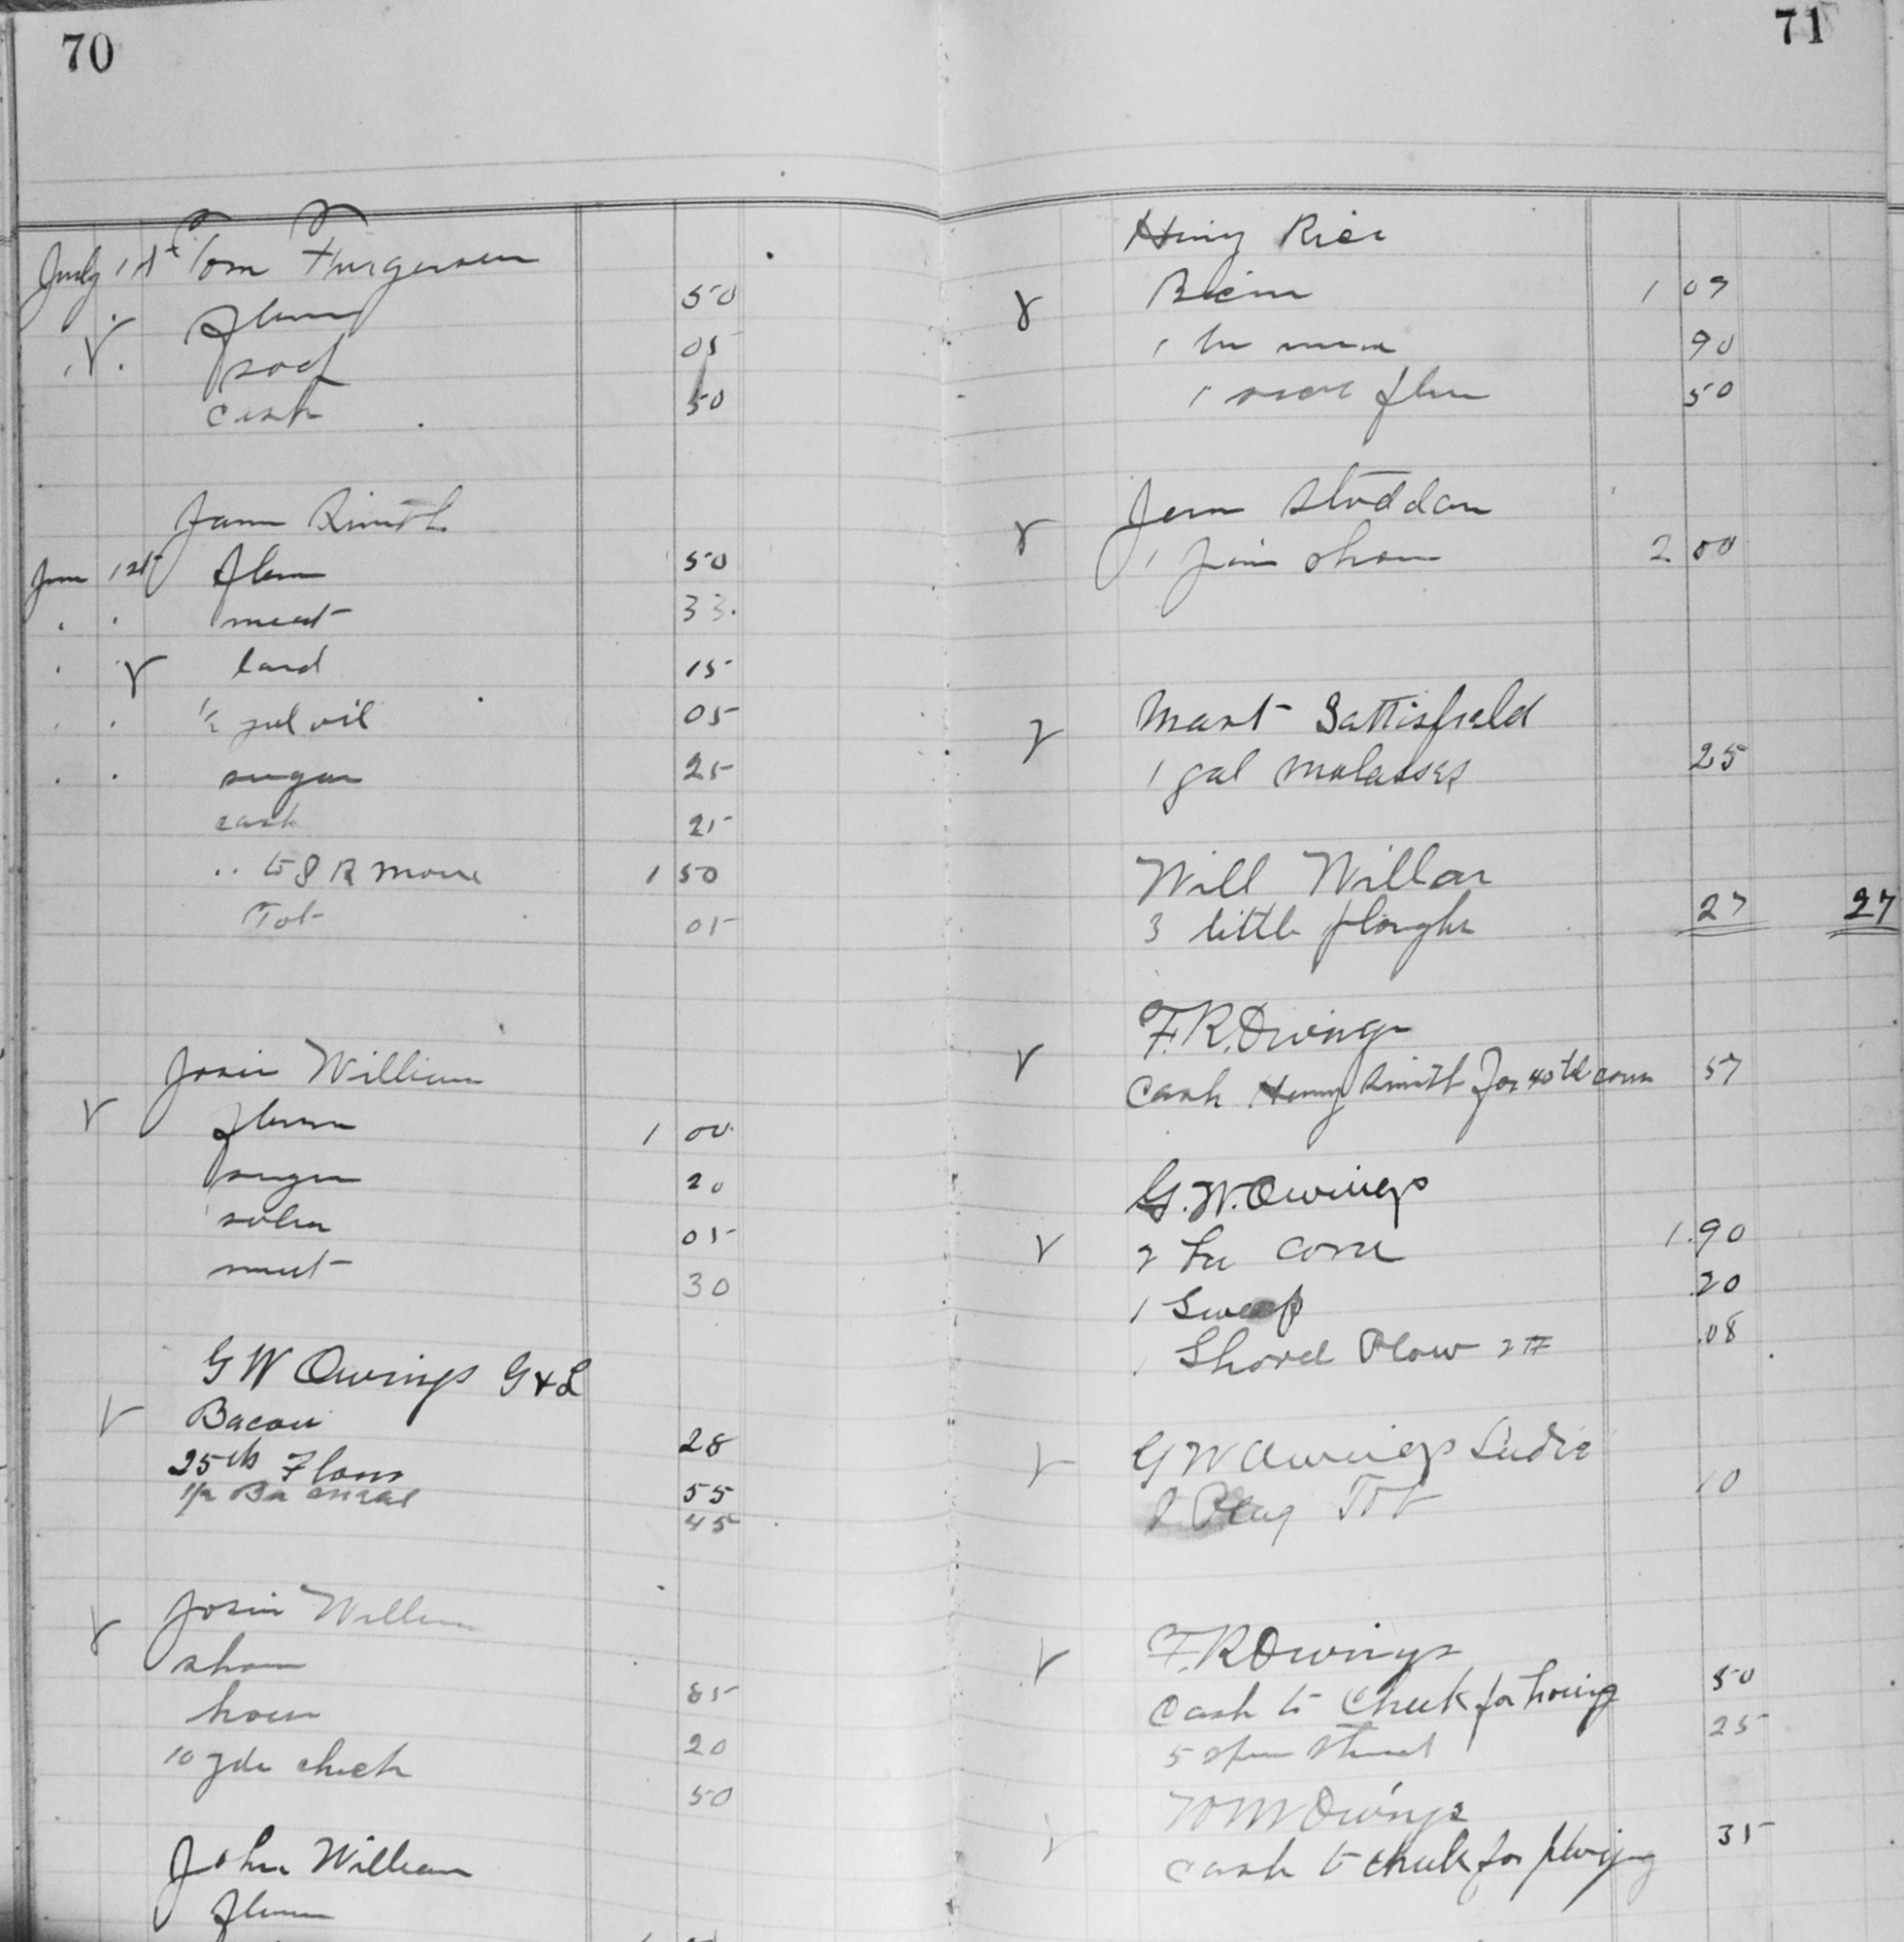 LEDGER PAGE FROM THE OWINGS STORE #3